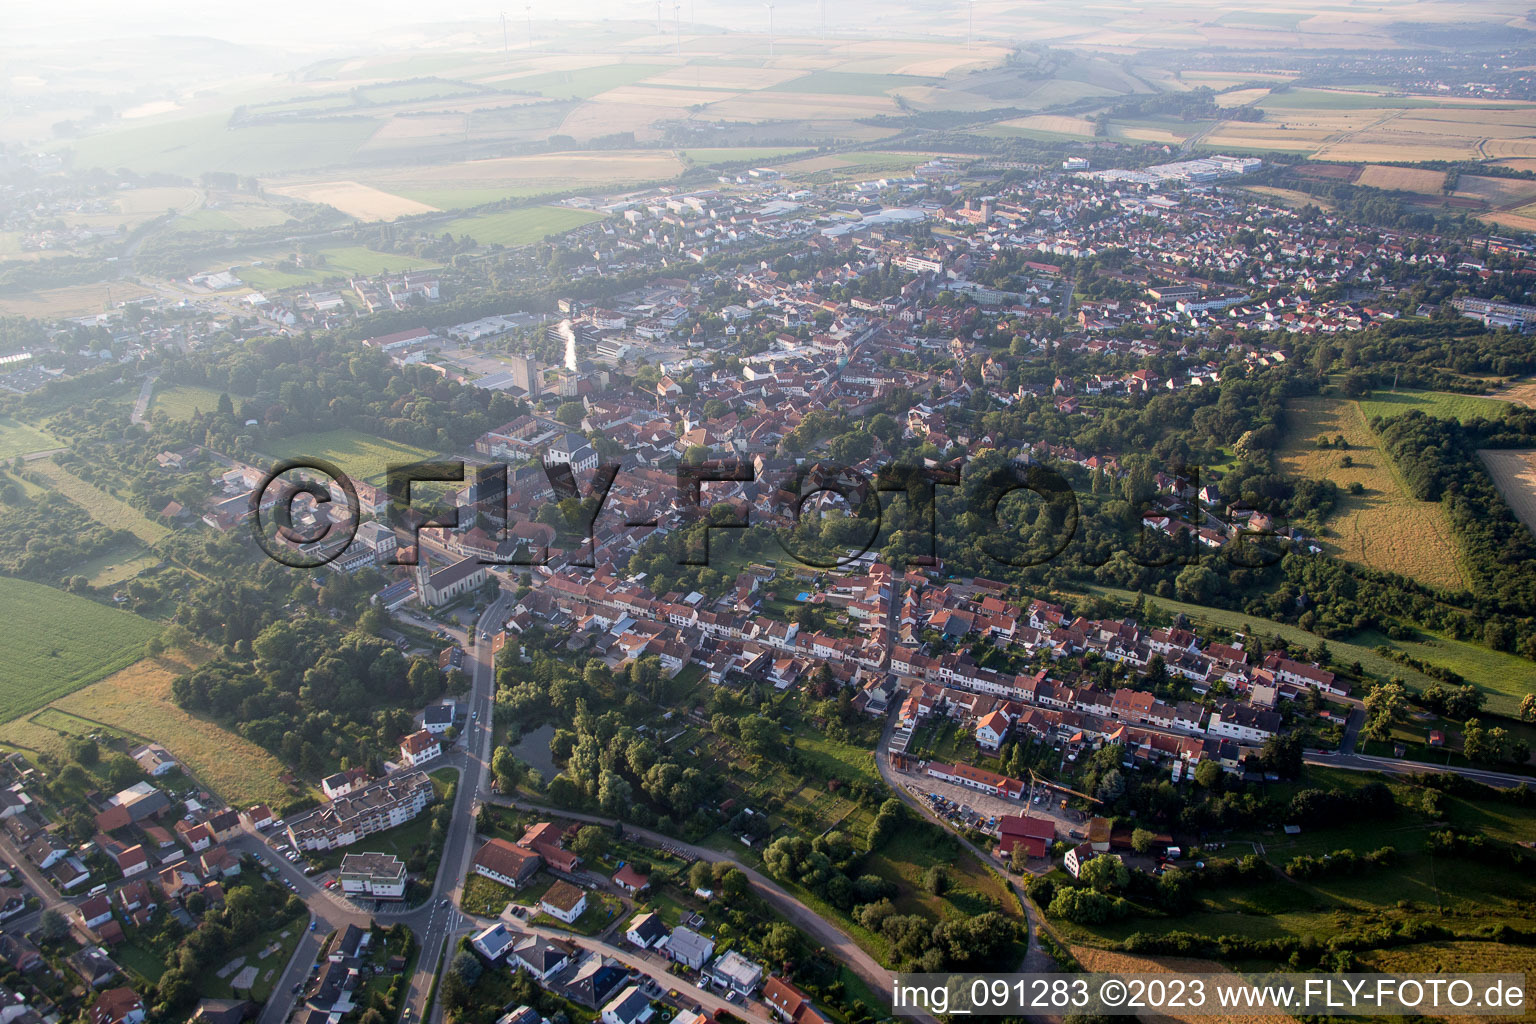 Aerial view of Town View of the streets and houses of the residential areas in Kirchheimbolanden in the state Rhineland-Palatinate, Germany